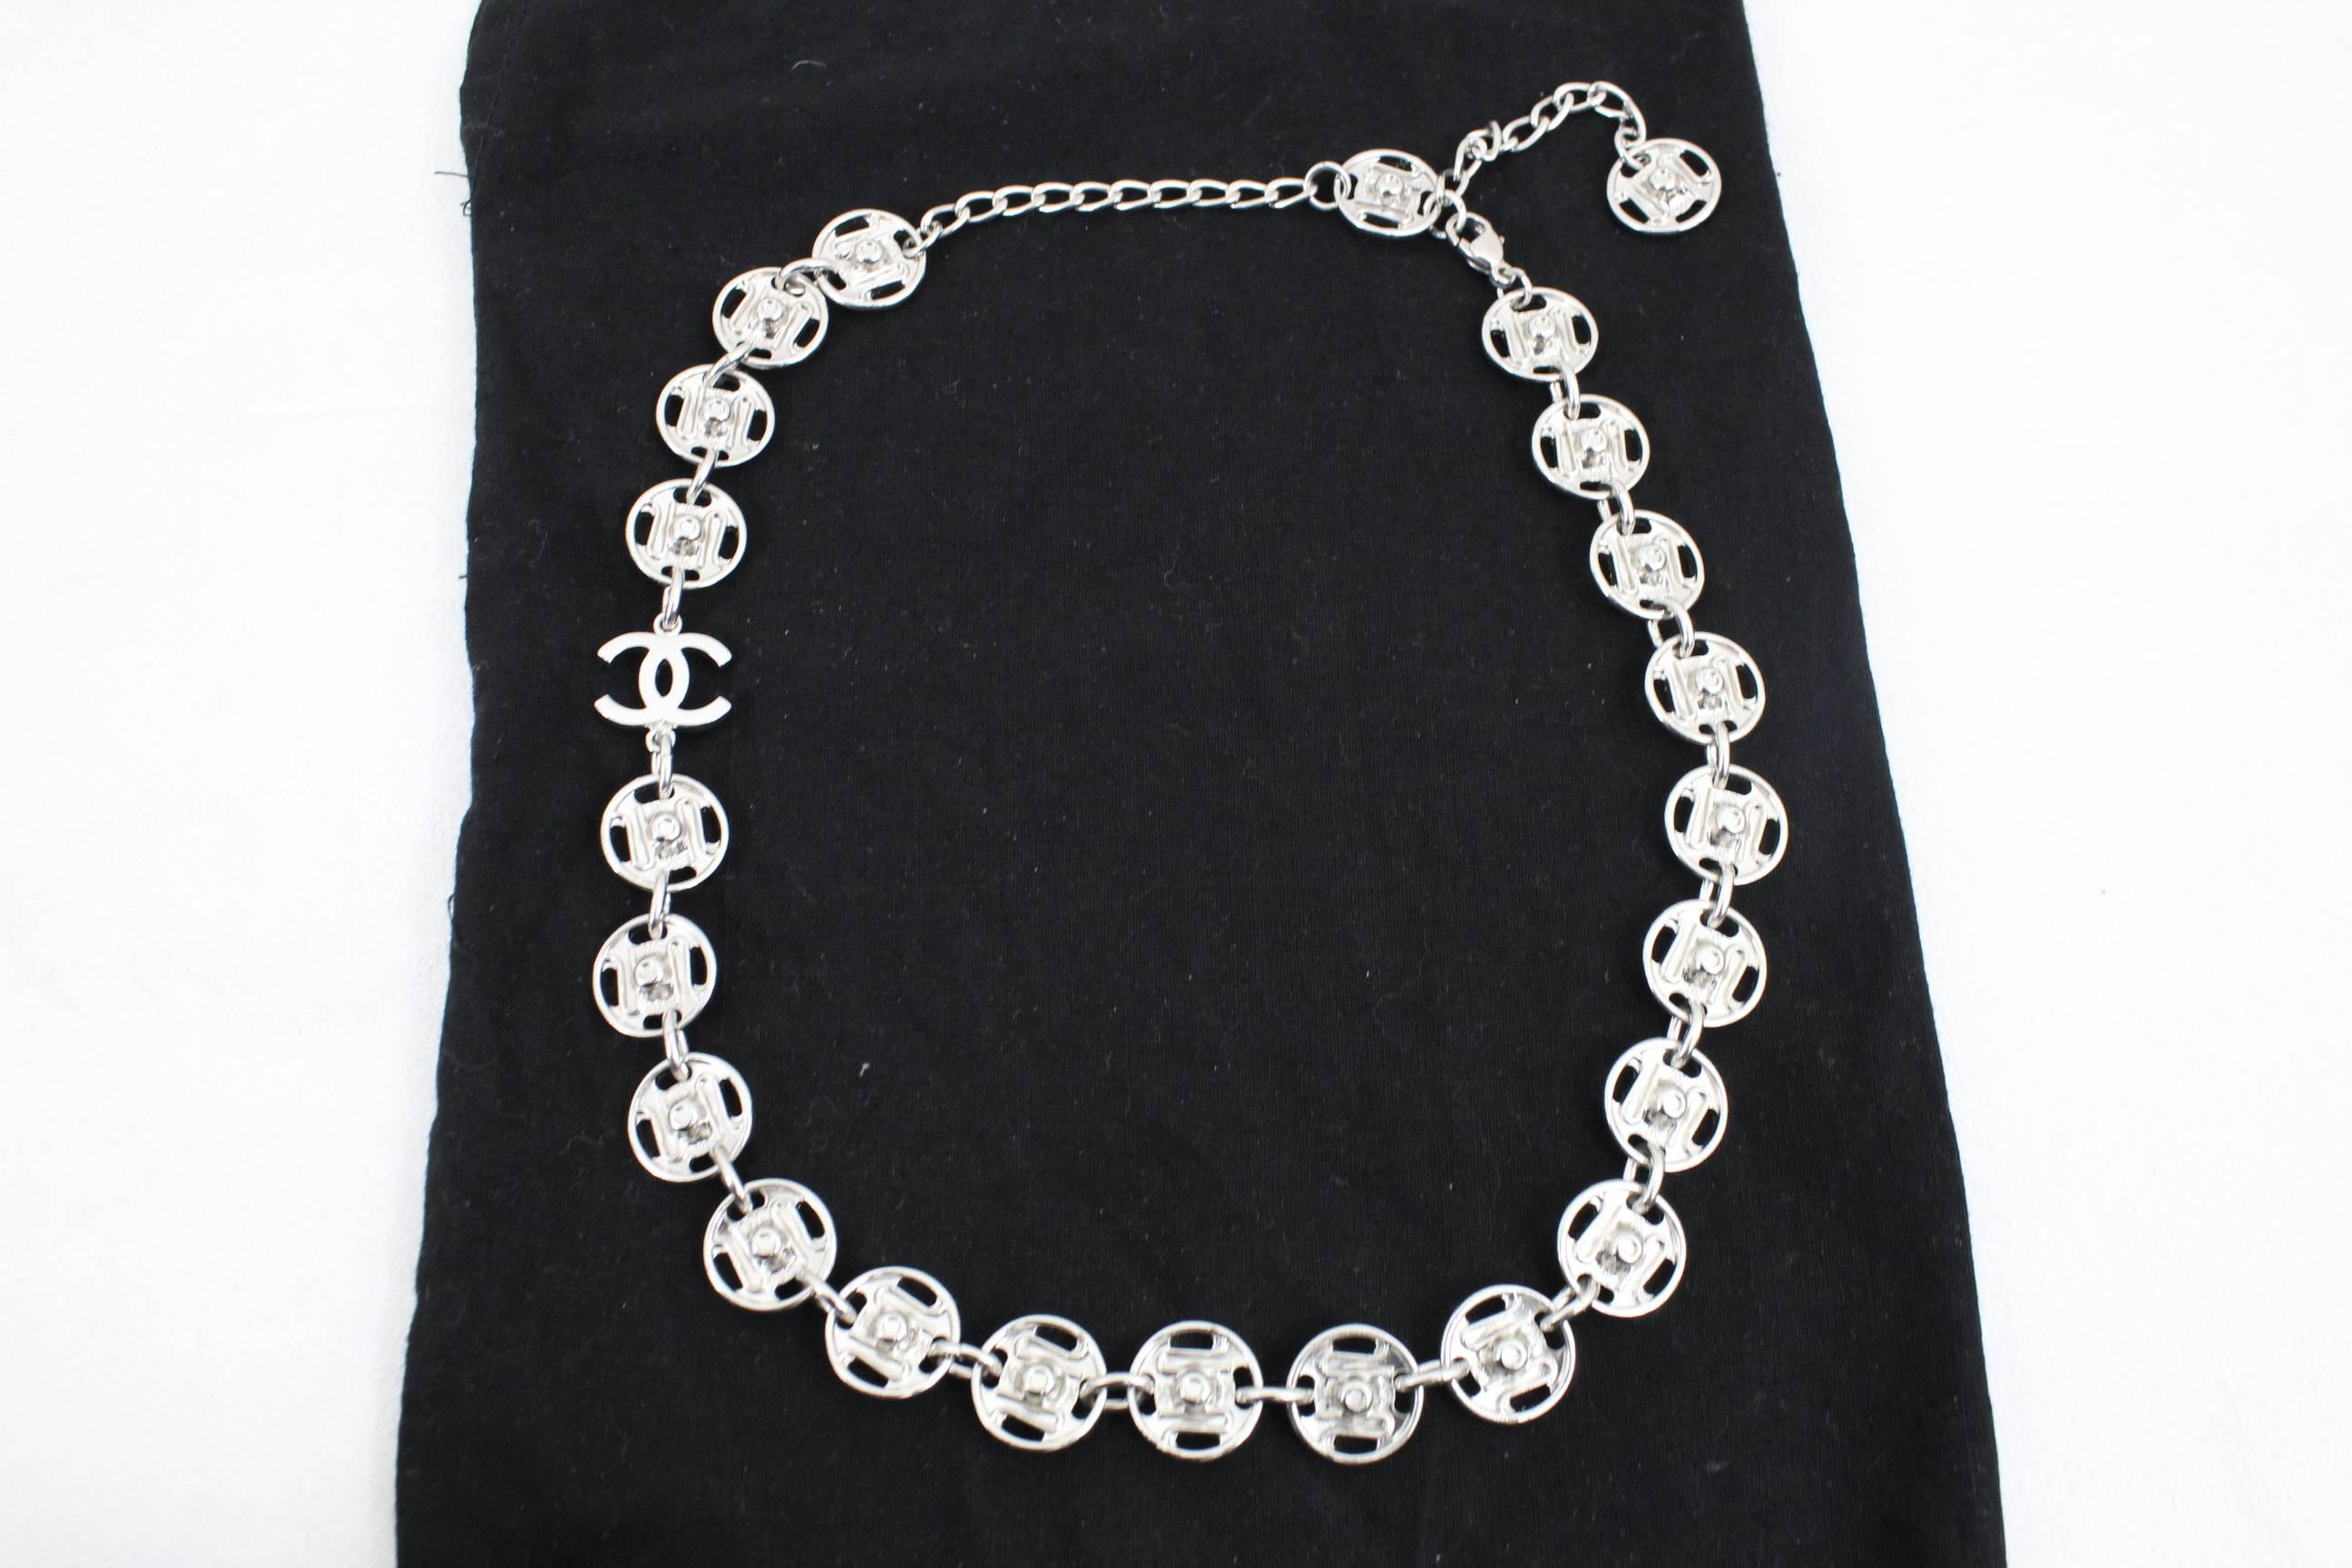 Women's or Men's Chanel Necklace seein in 2003/2004 Winter Runaway Fashion Show For Sale